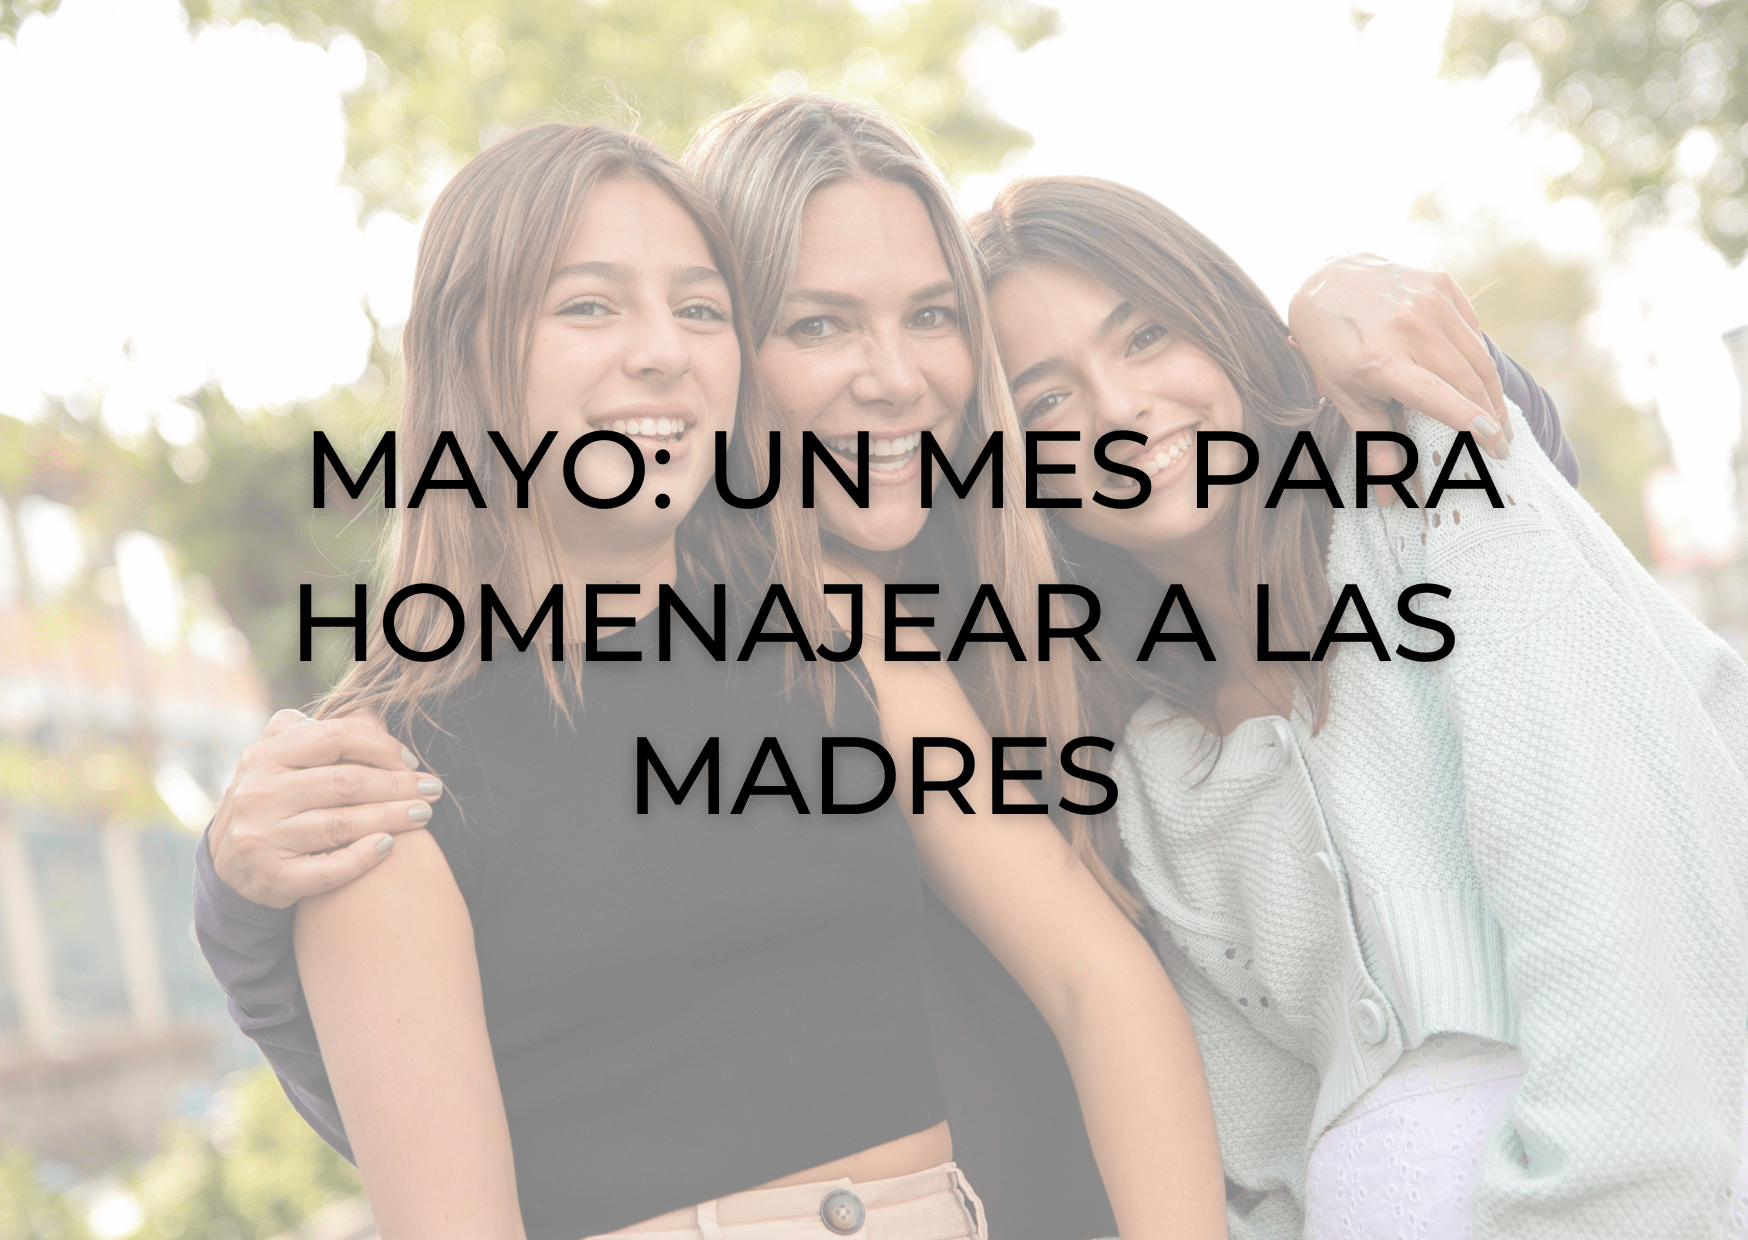 May: a month to honor mothers